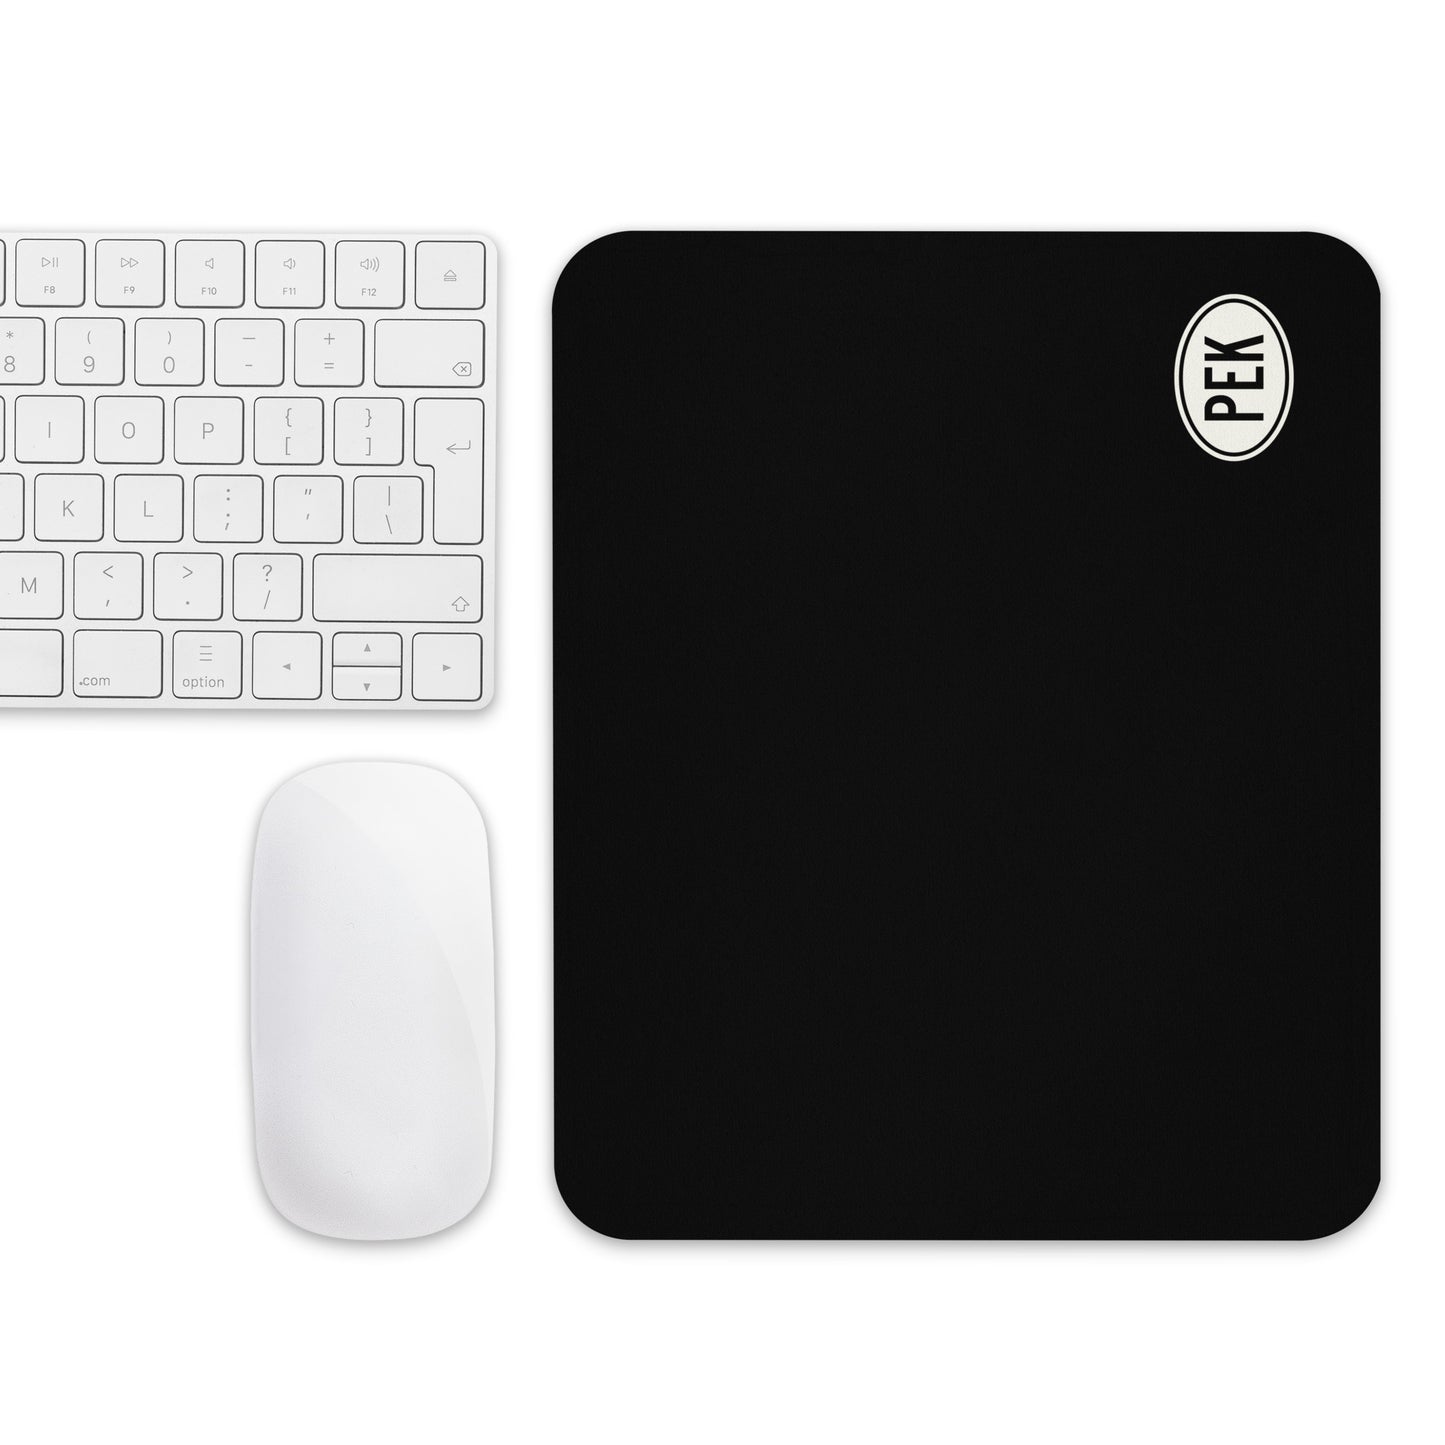 Unique Travel Gift Mouse Pad - White Oval • PEK Beijing • YHM Designs - Image 04